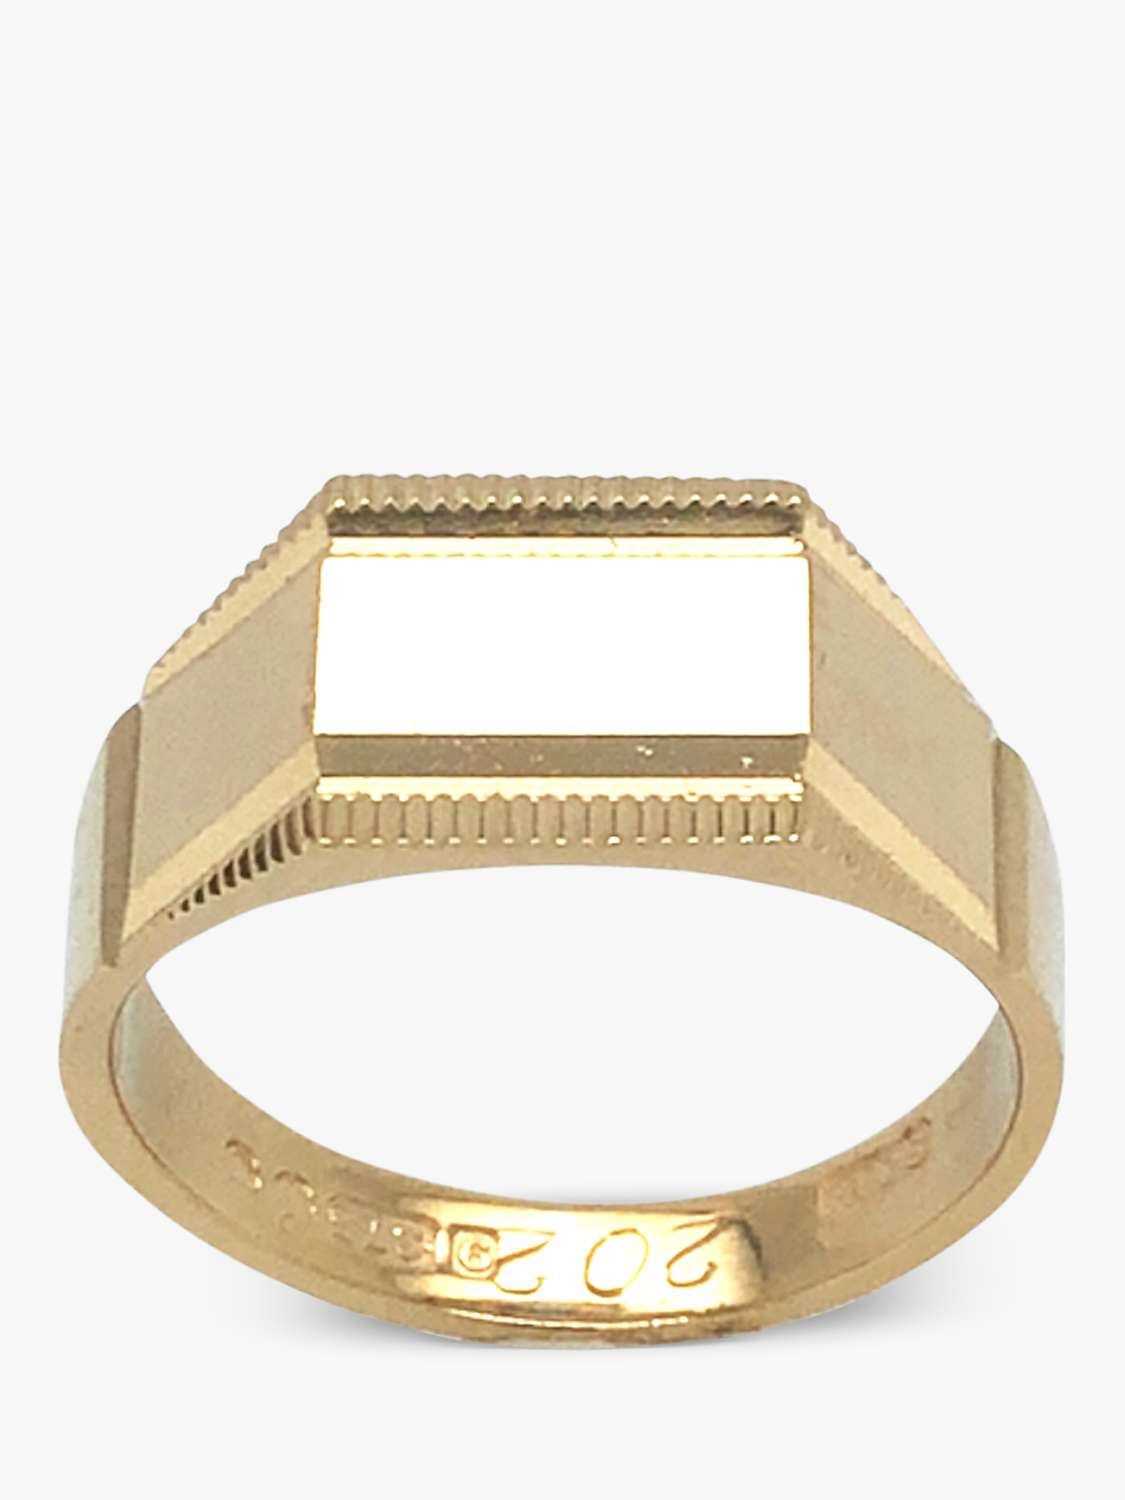 Buy VF Jewellery 9ct Yellow Gold Second Hand Cur Edge Signet Ring Online at johnlewis.com